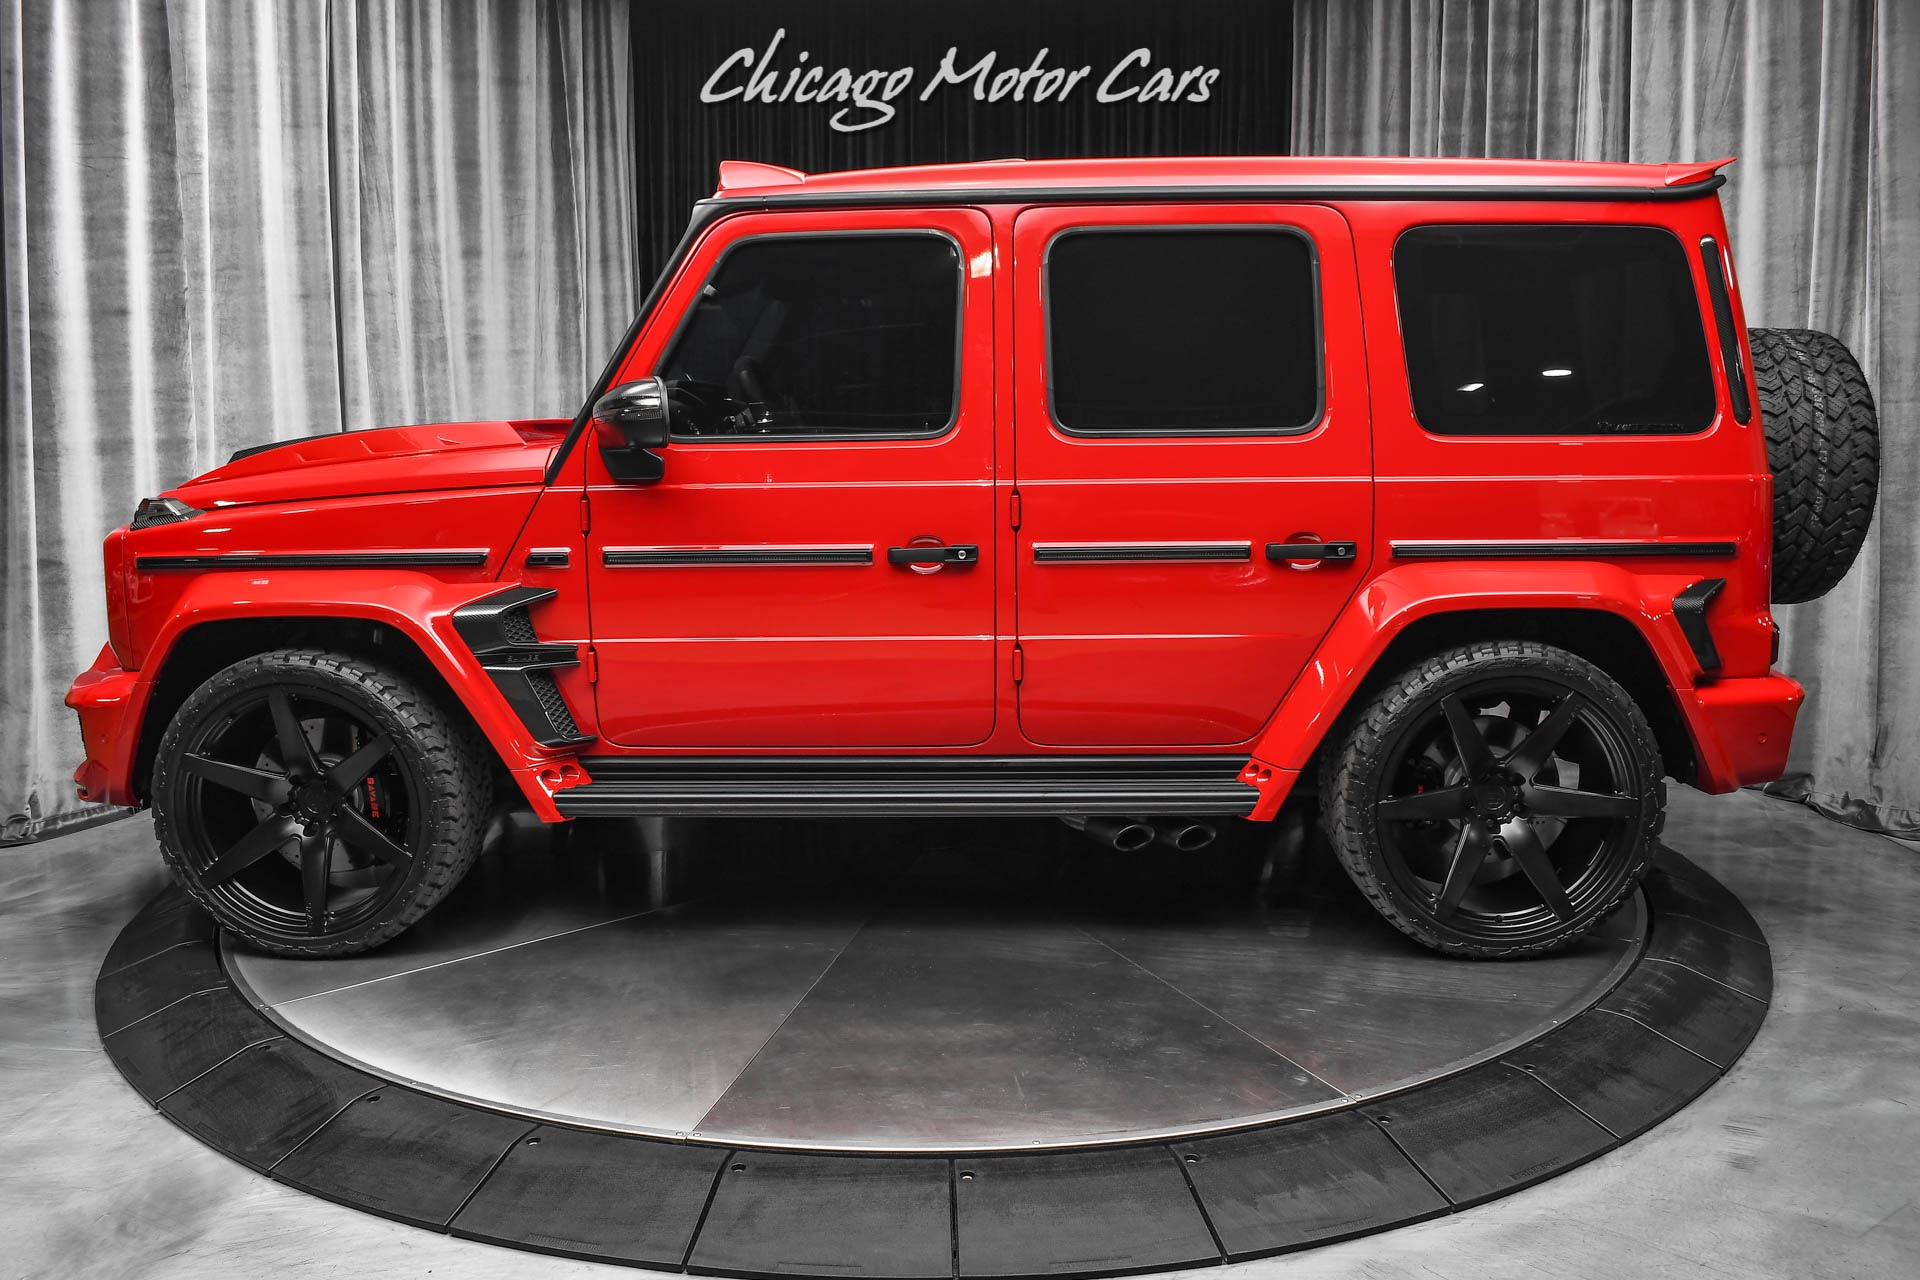 Used-2021-Mercedes-Benz-G63-AMG-4-Matic-Brabus-Widebody-Carbon-Fiber-Loaded-700HP-Brand-NEW-Build